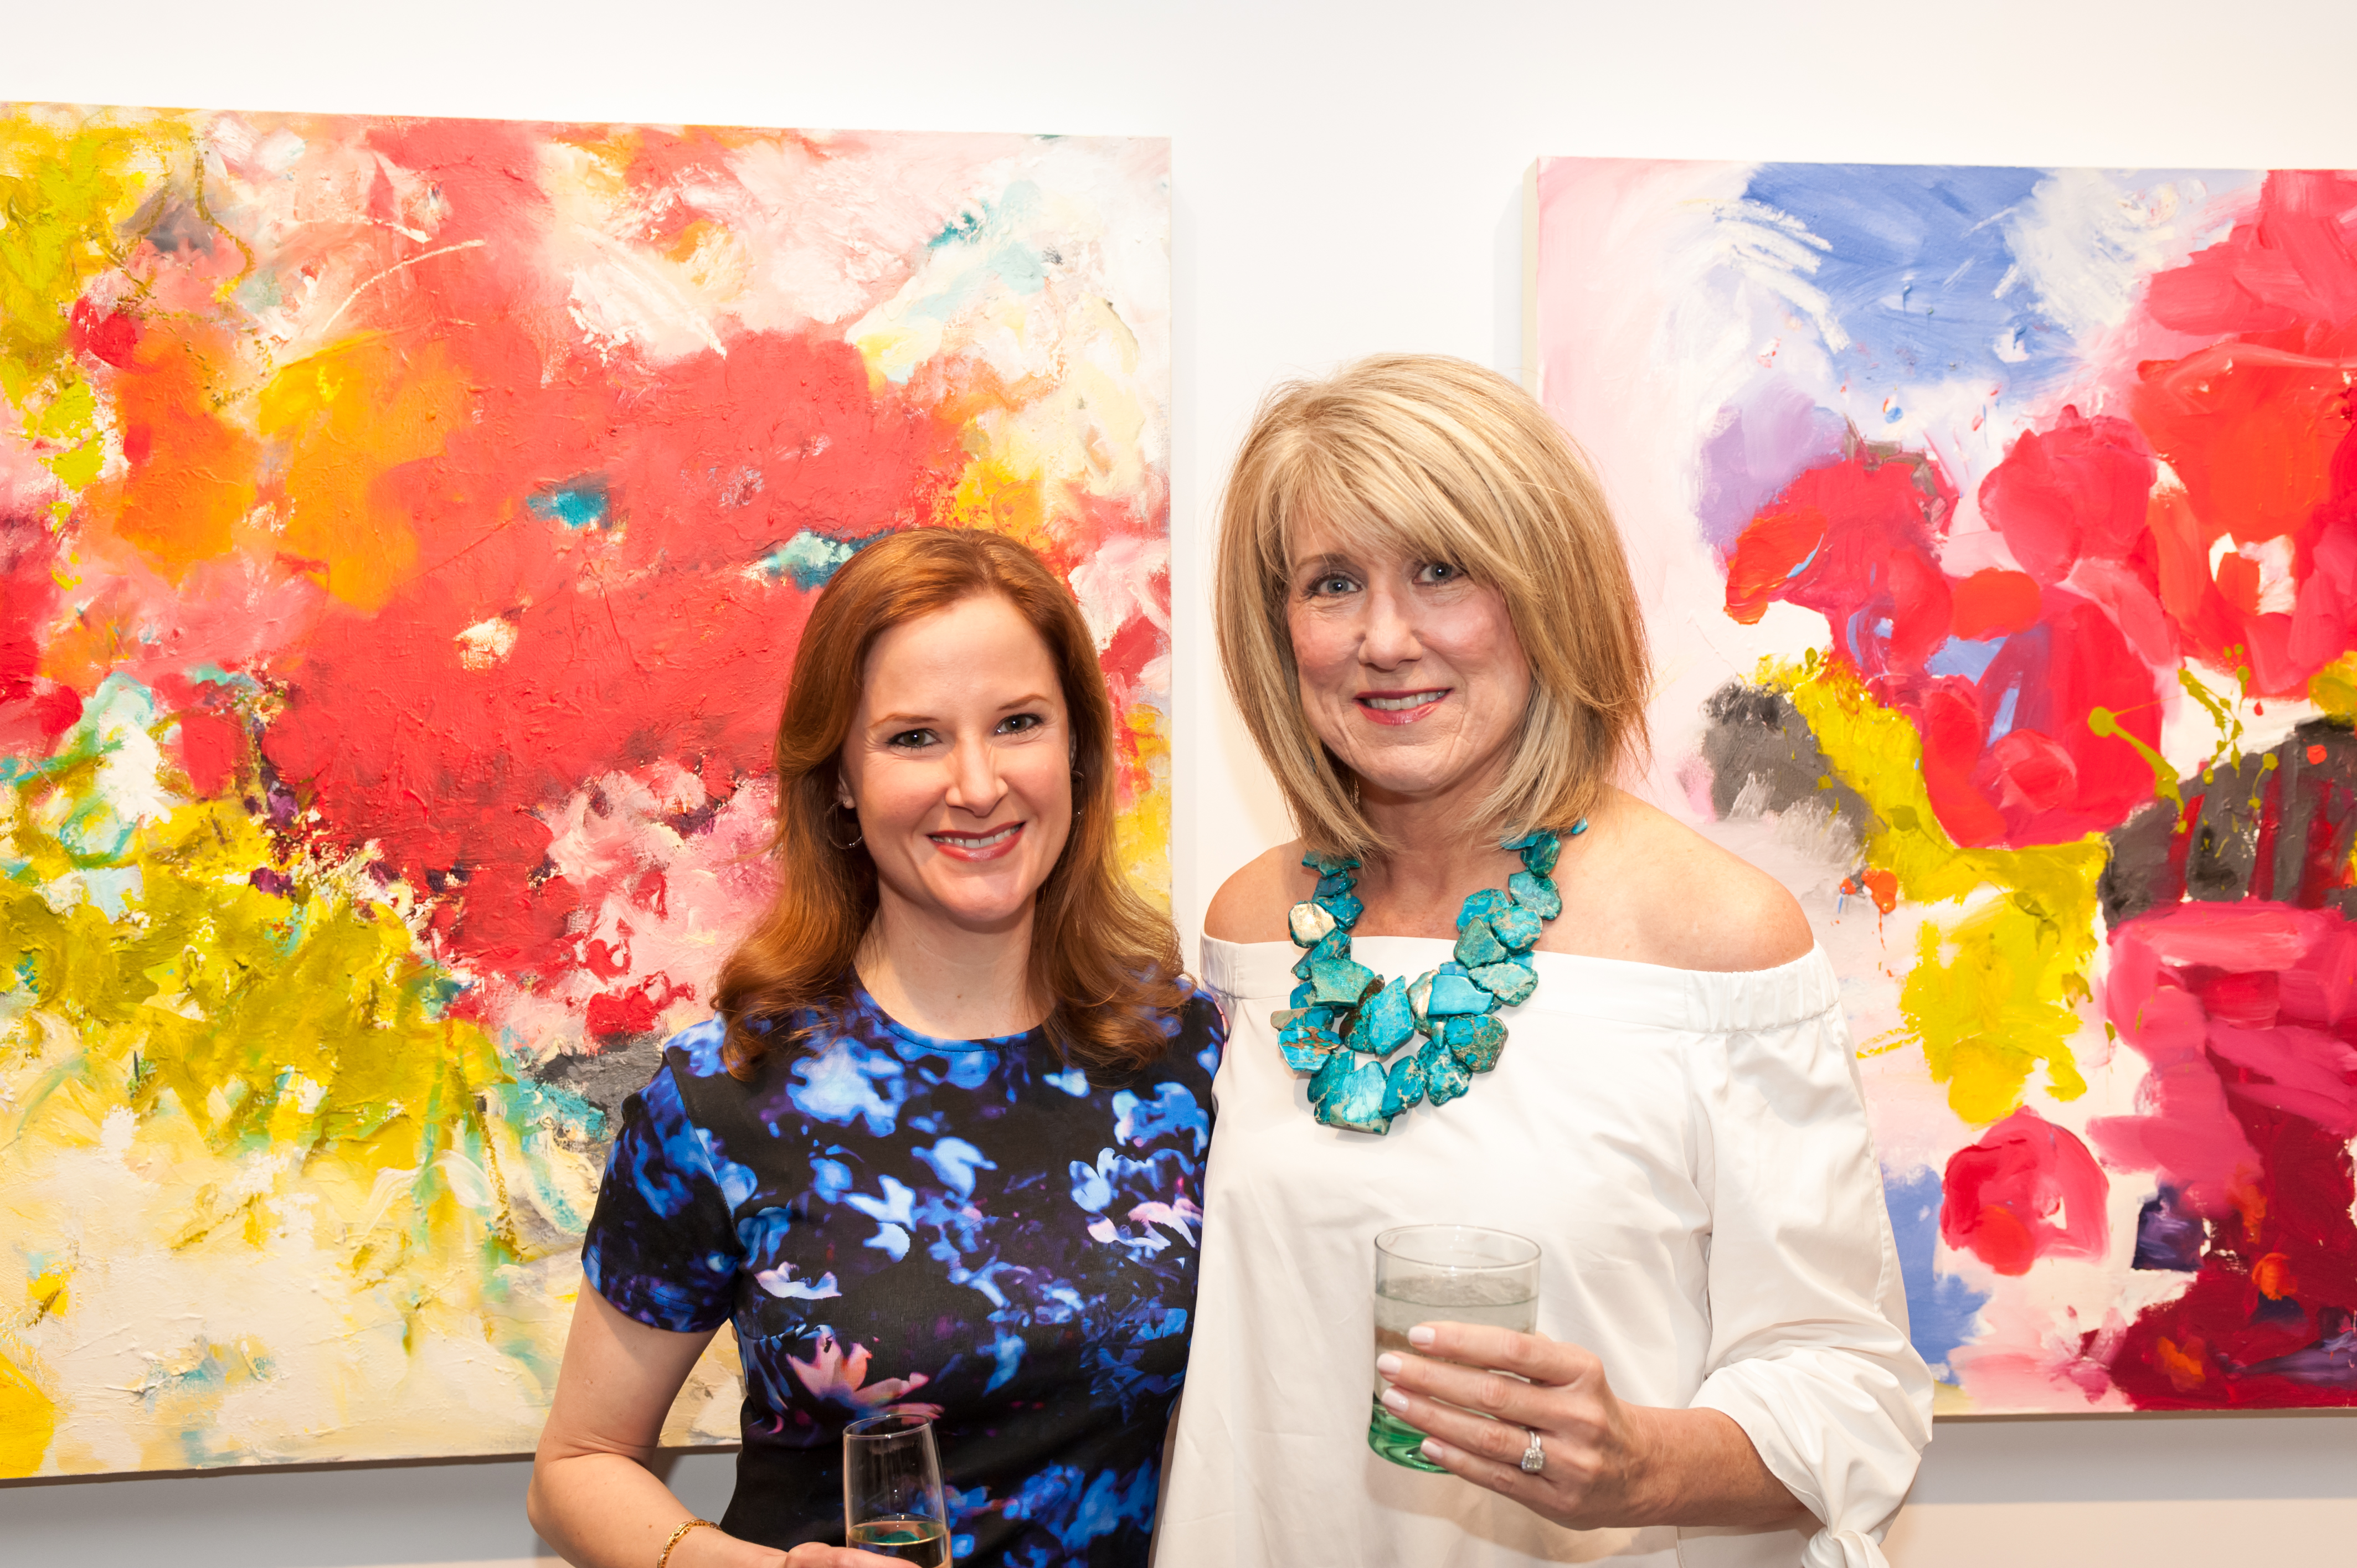 Shaie Williams for AGN Media. Caroline Kneese and Xan Sinclair Koonce at "Recollection" Anniversary Exhibition Open Reception held at Cerulean Gallery in Amarillo, TX on January 15, 2016